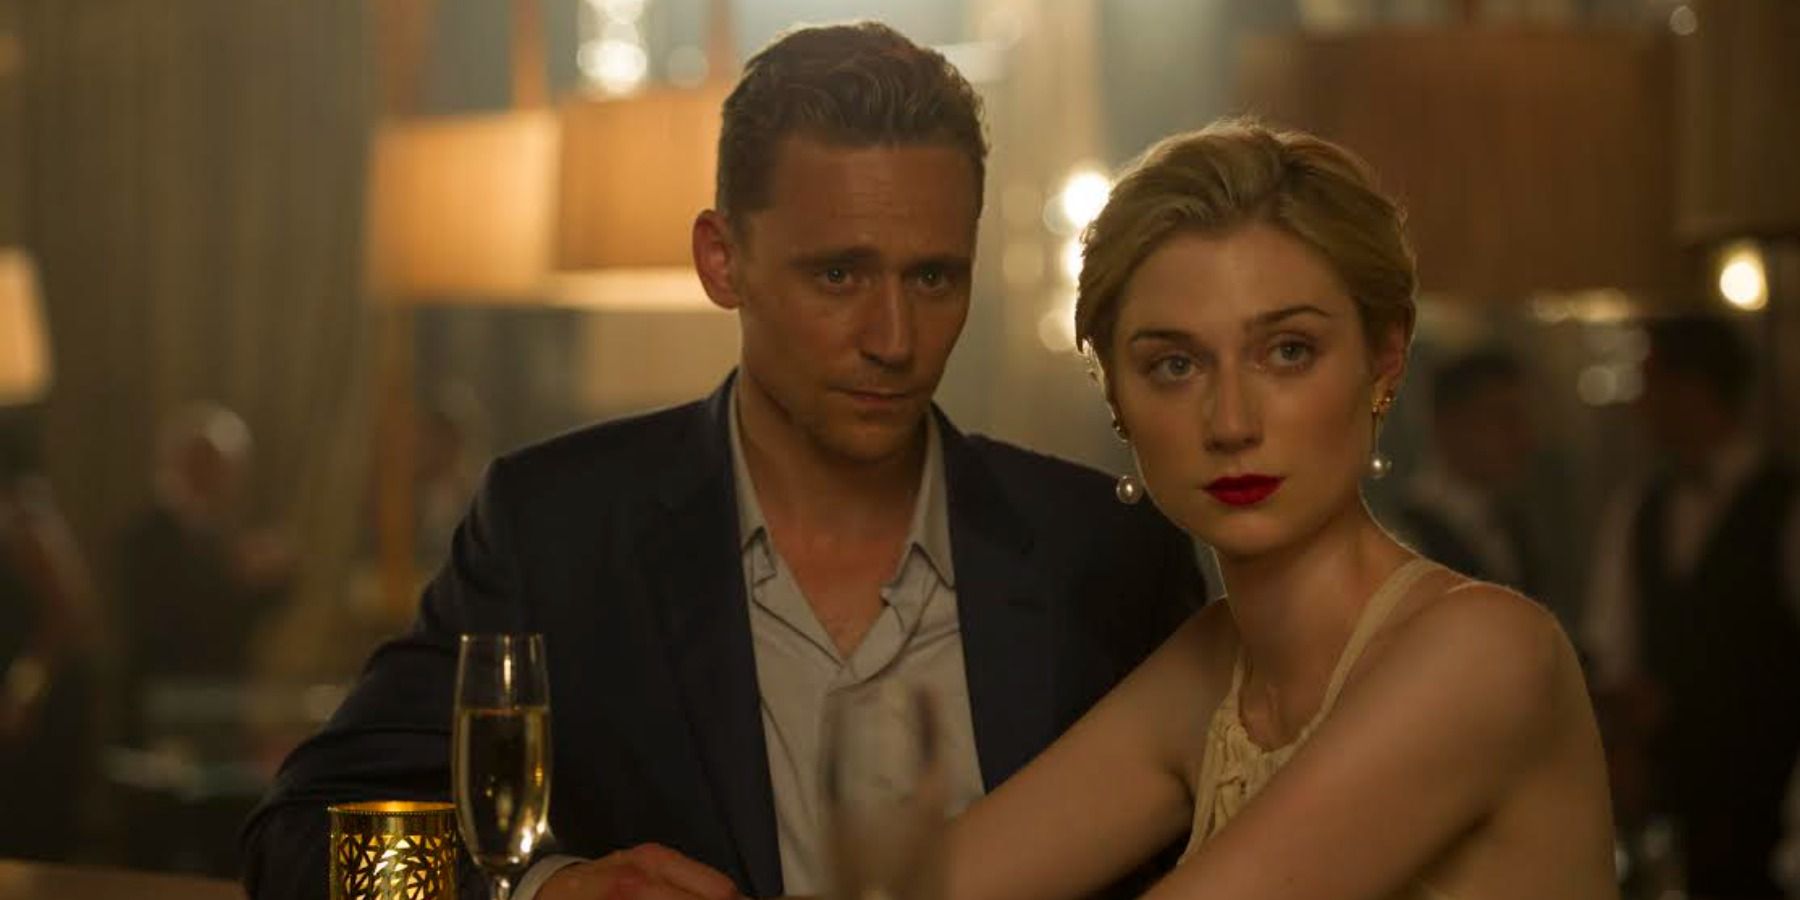 Miniseries Night Manager